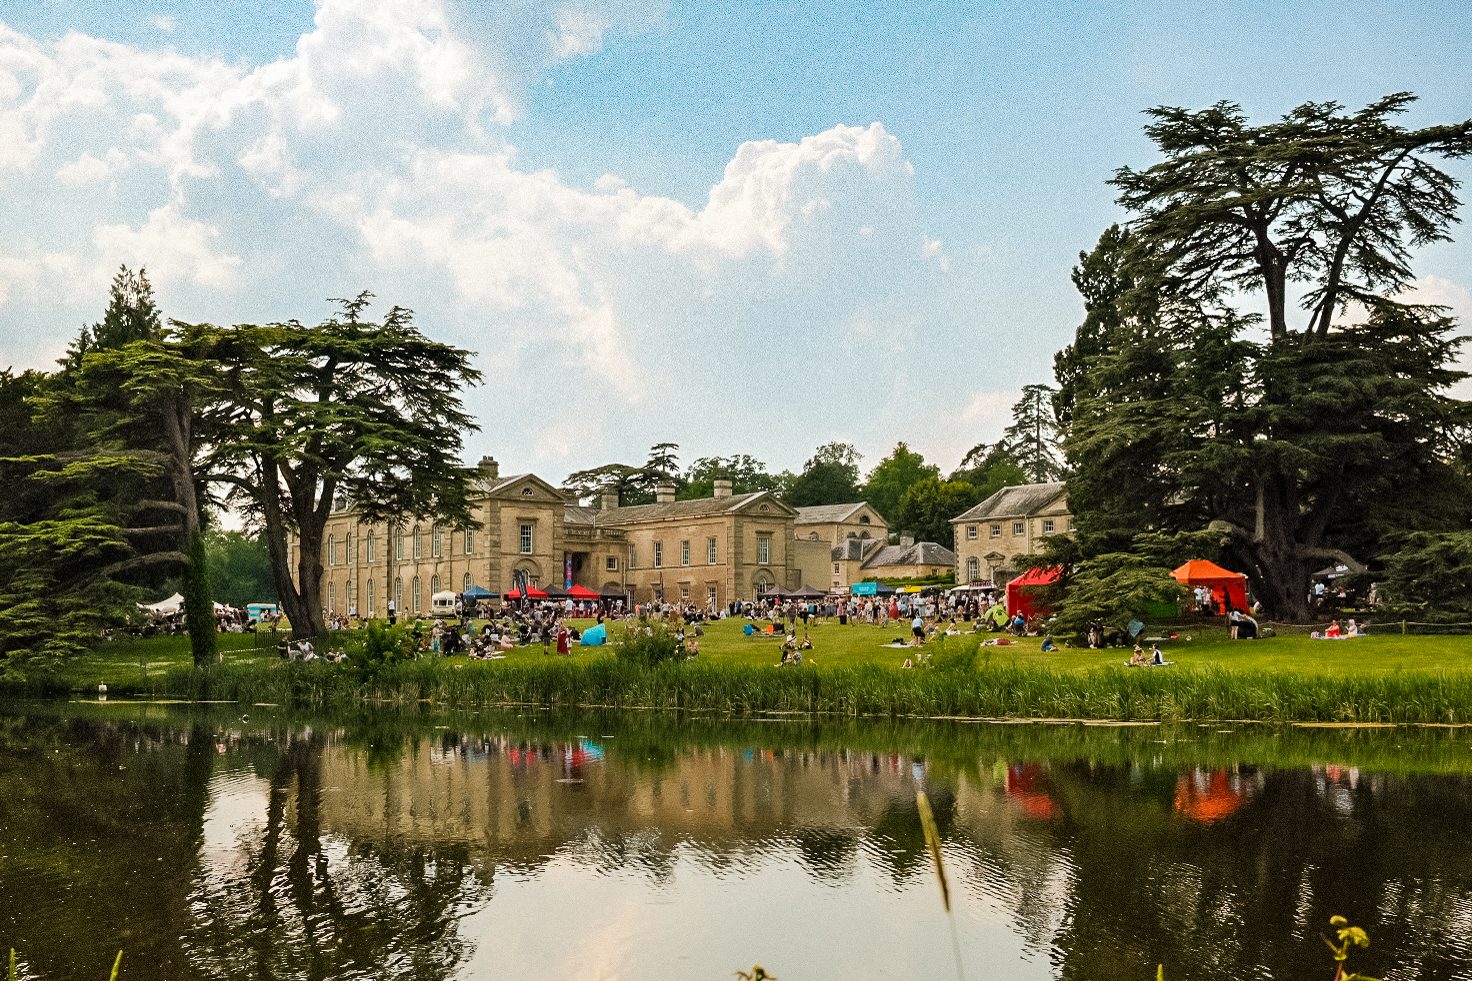 A lake is in the foreground with Compton Verney House the main focus. There are people and food stalls outside the house enjoying food and drink on a summers day.